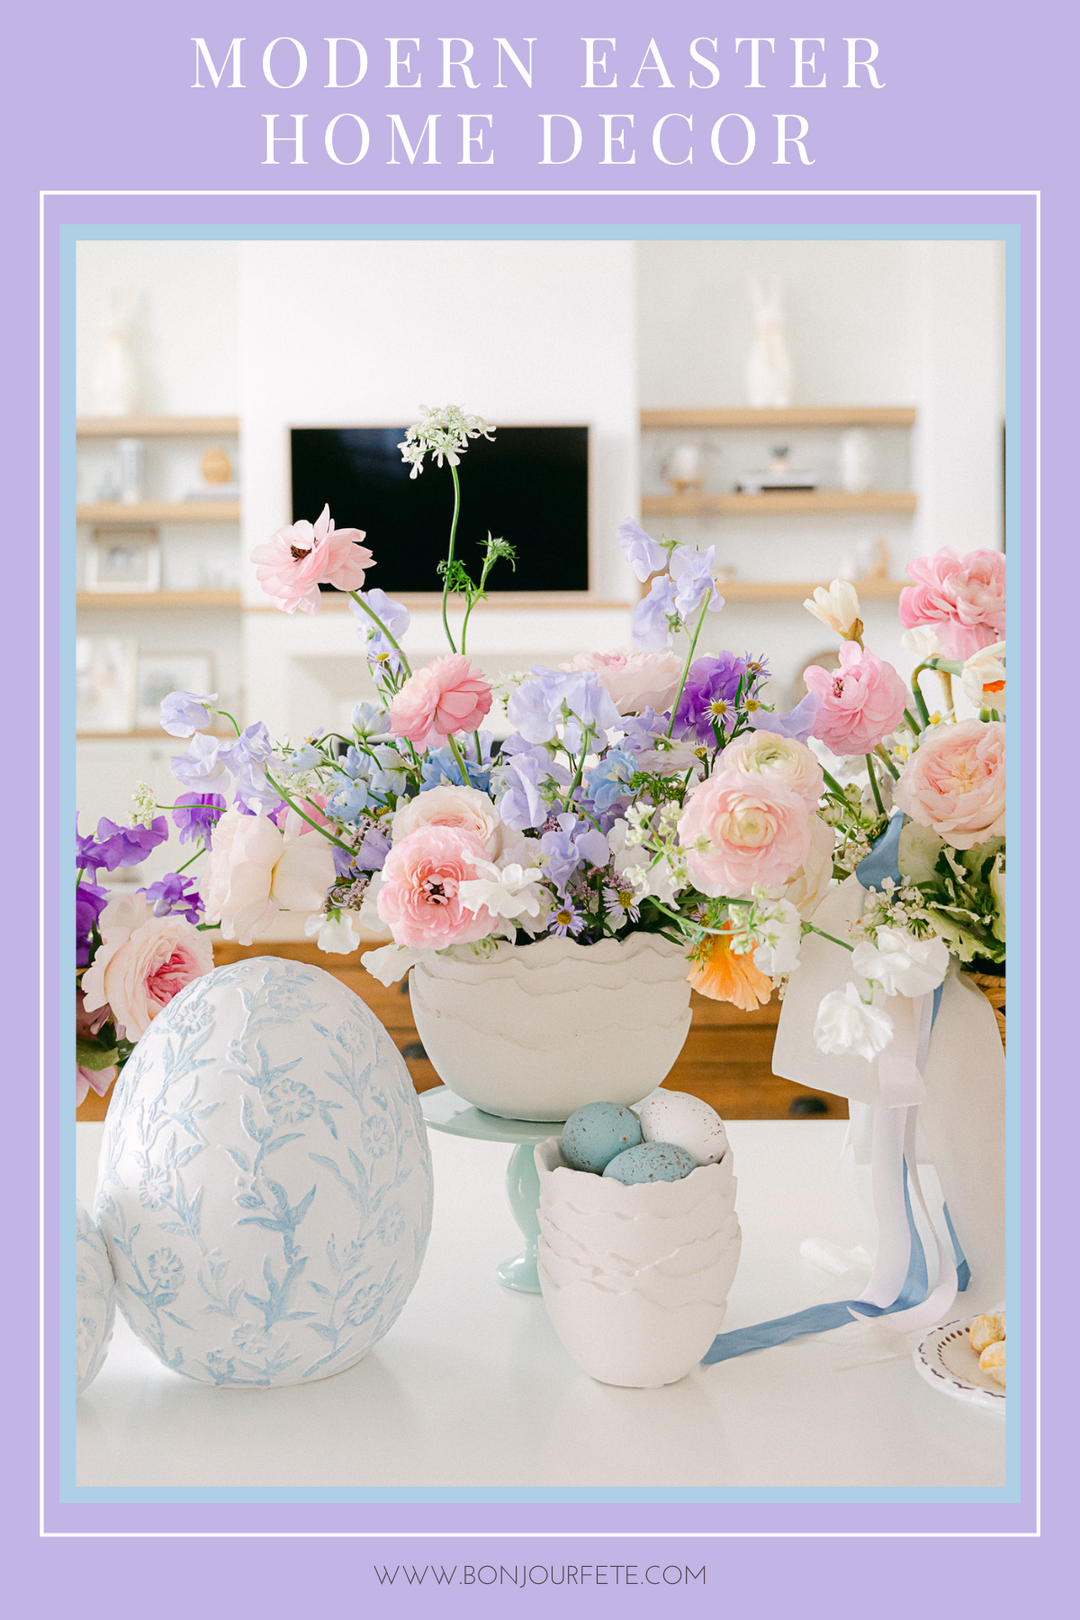 MODERN EASTER DECORATING IDEAS FOR THE HOME